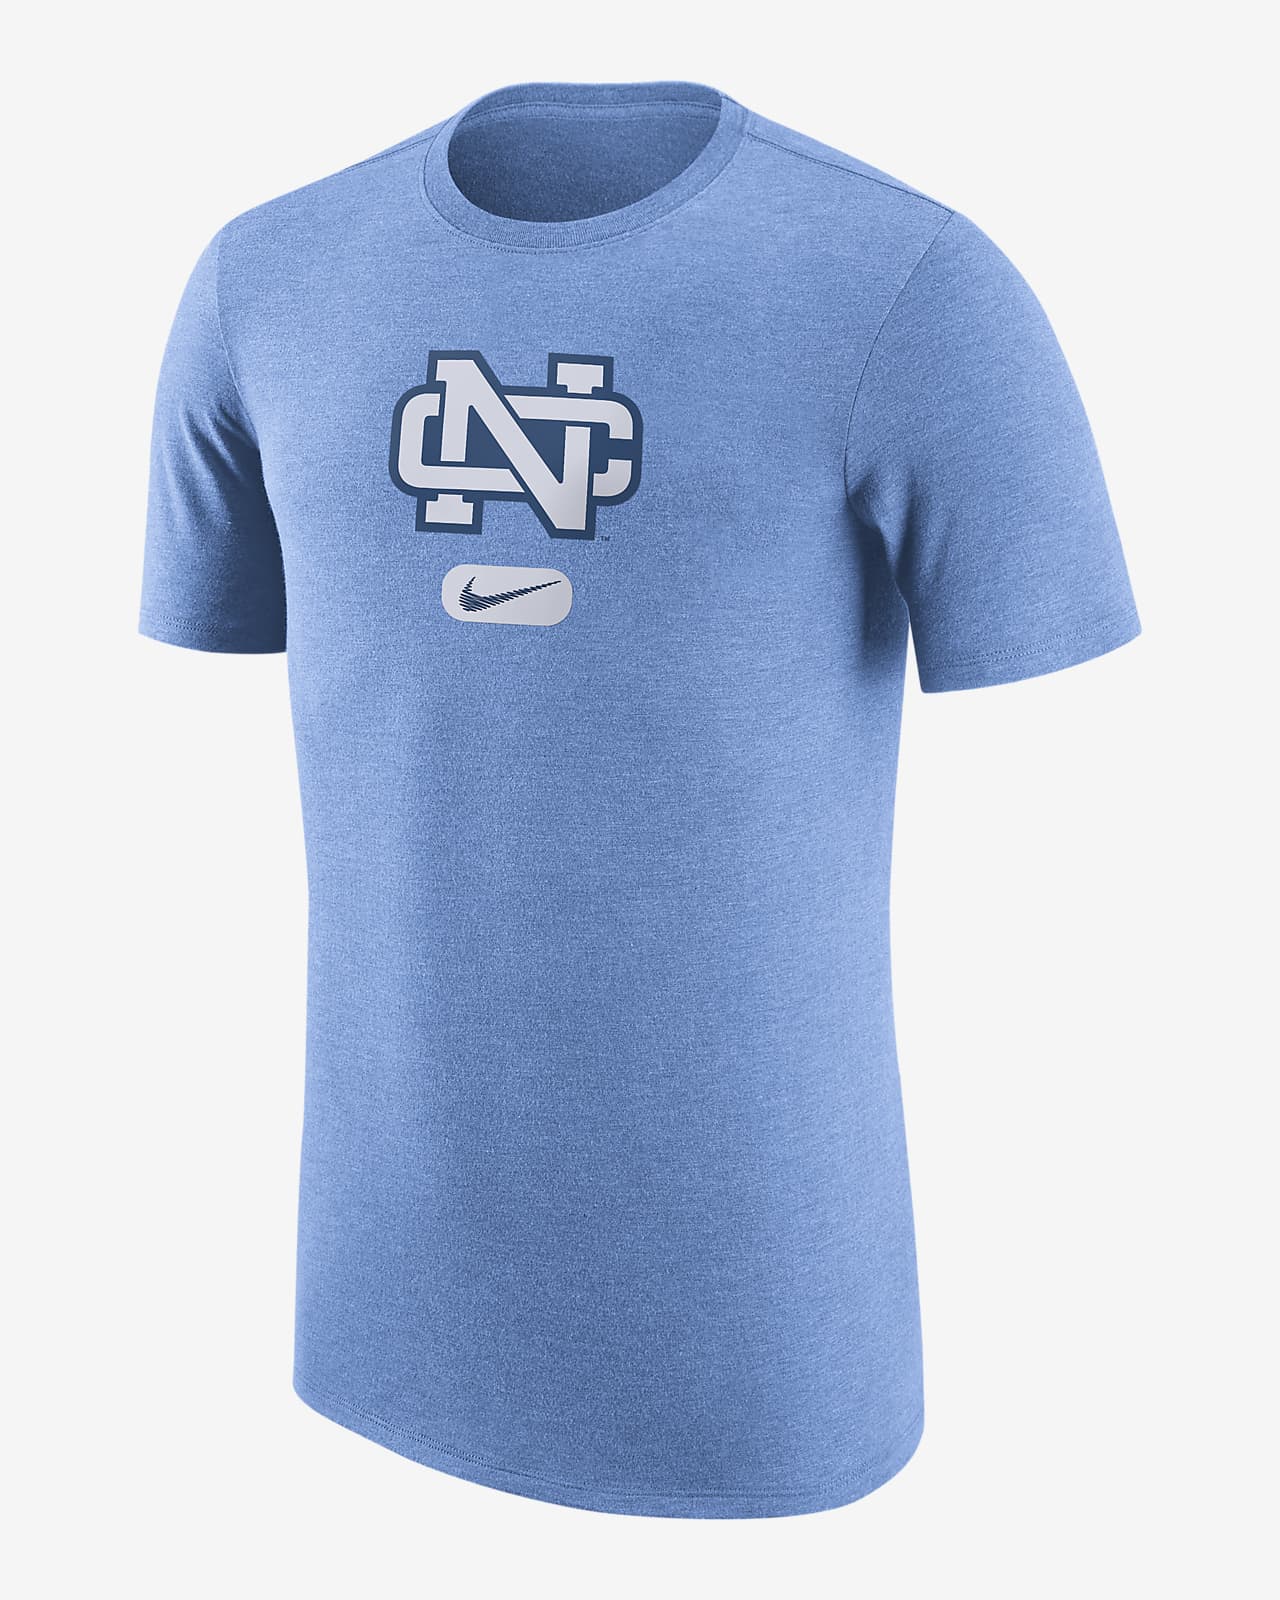 Nike College Basketball (unc) Men's T-shirt, By Nike in Blue for